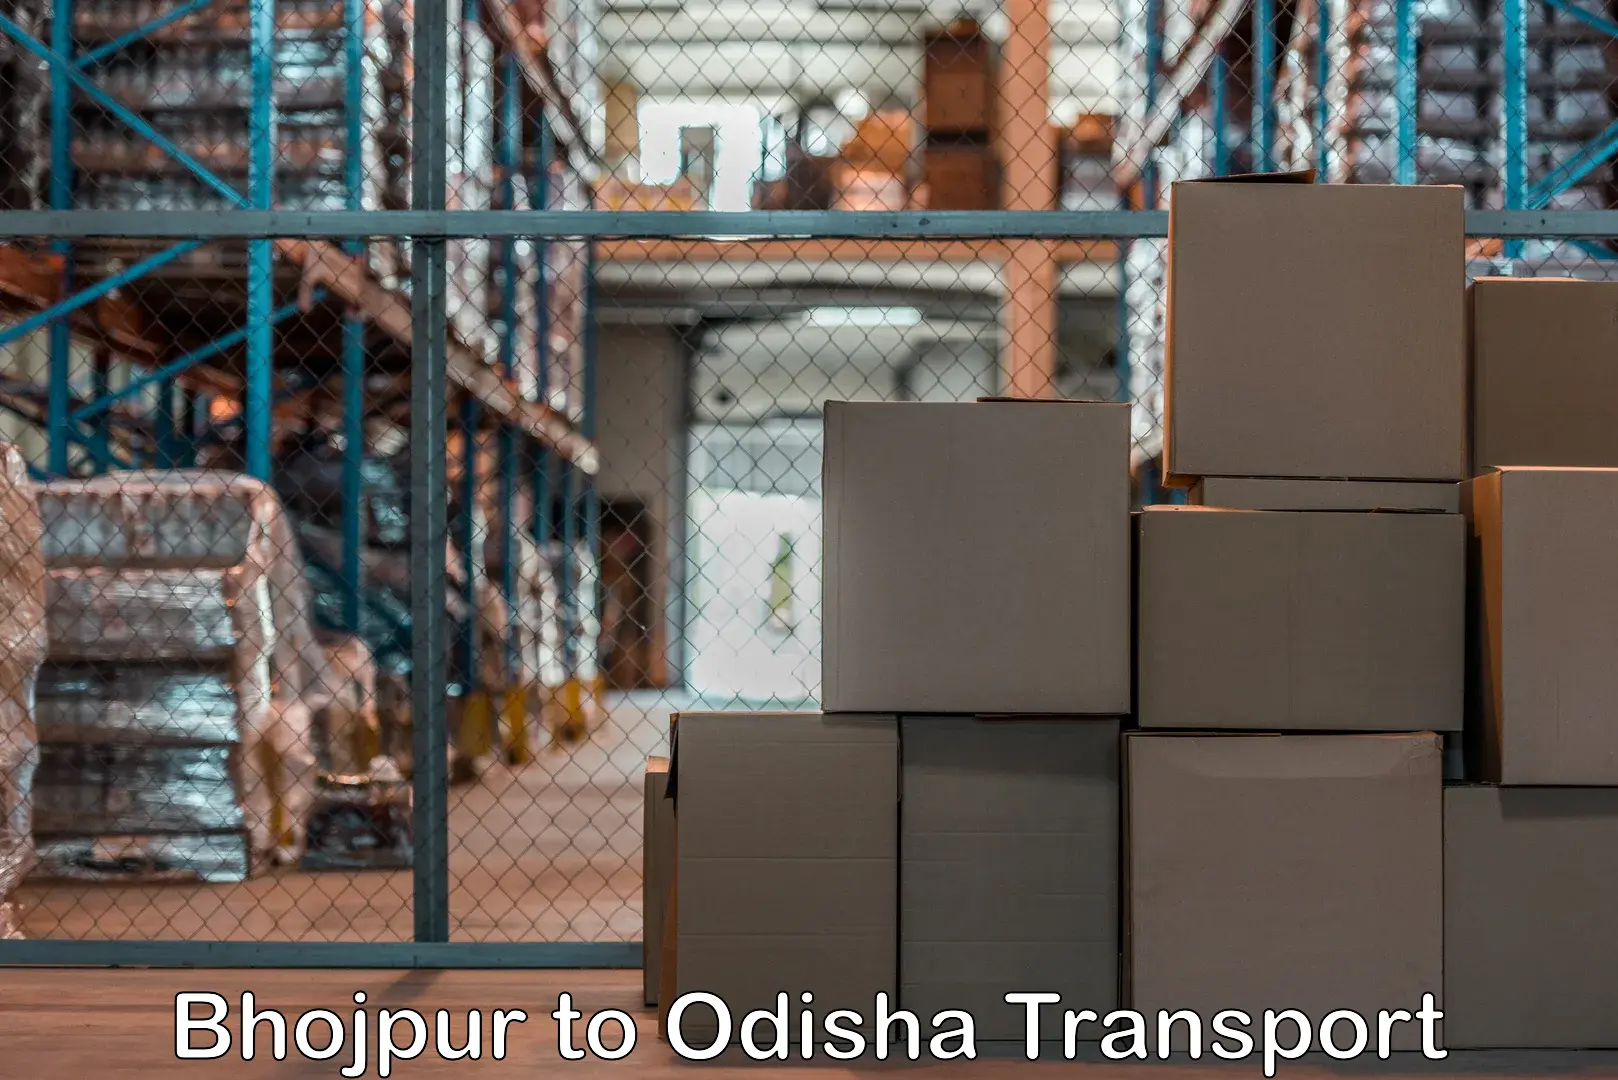 Truck transport companies in India Bhojpur to Joda